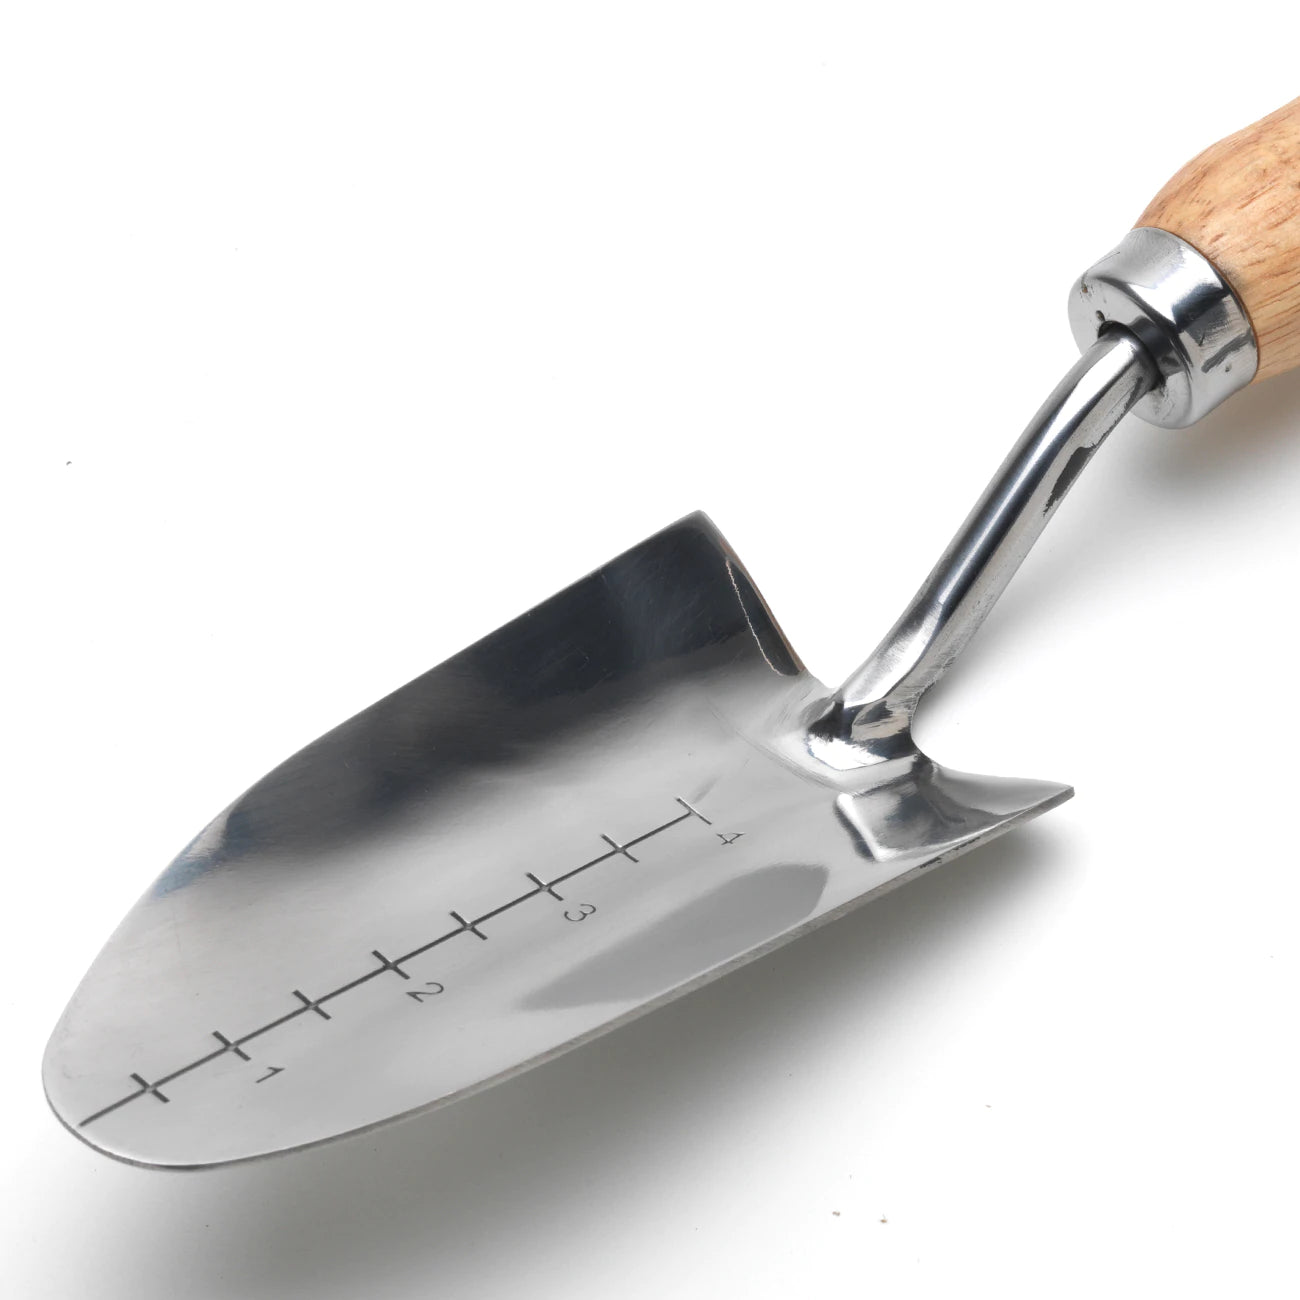 The transplanter's face is engraved with depth markings in inches so you know exactly how deep you're planting - especially useful for planting bulbs.